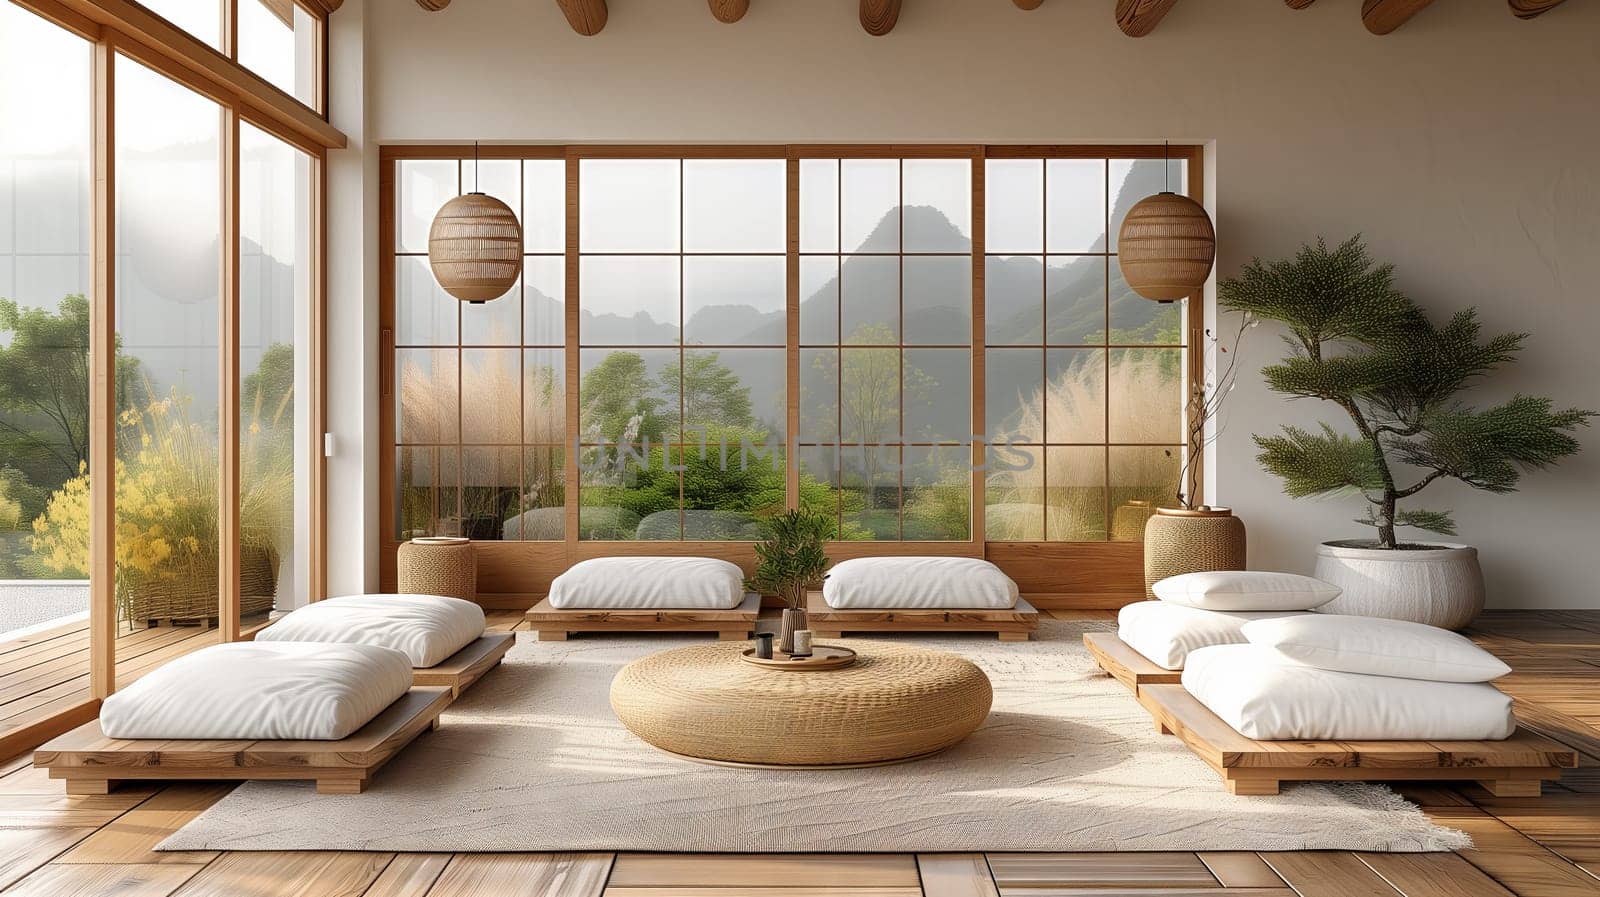 This living room in the house features hardwood flooring, a variety of plants, wooden furniture, and ample natural light from the many windows, creating a beautiful interior design